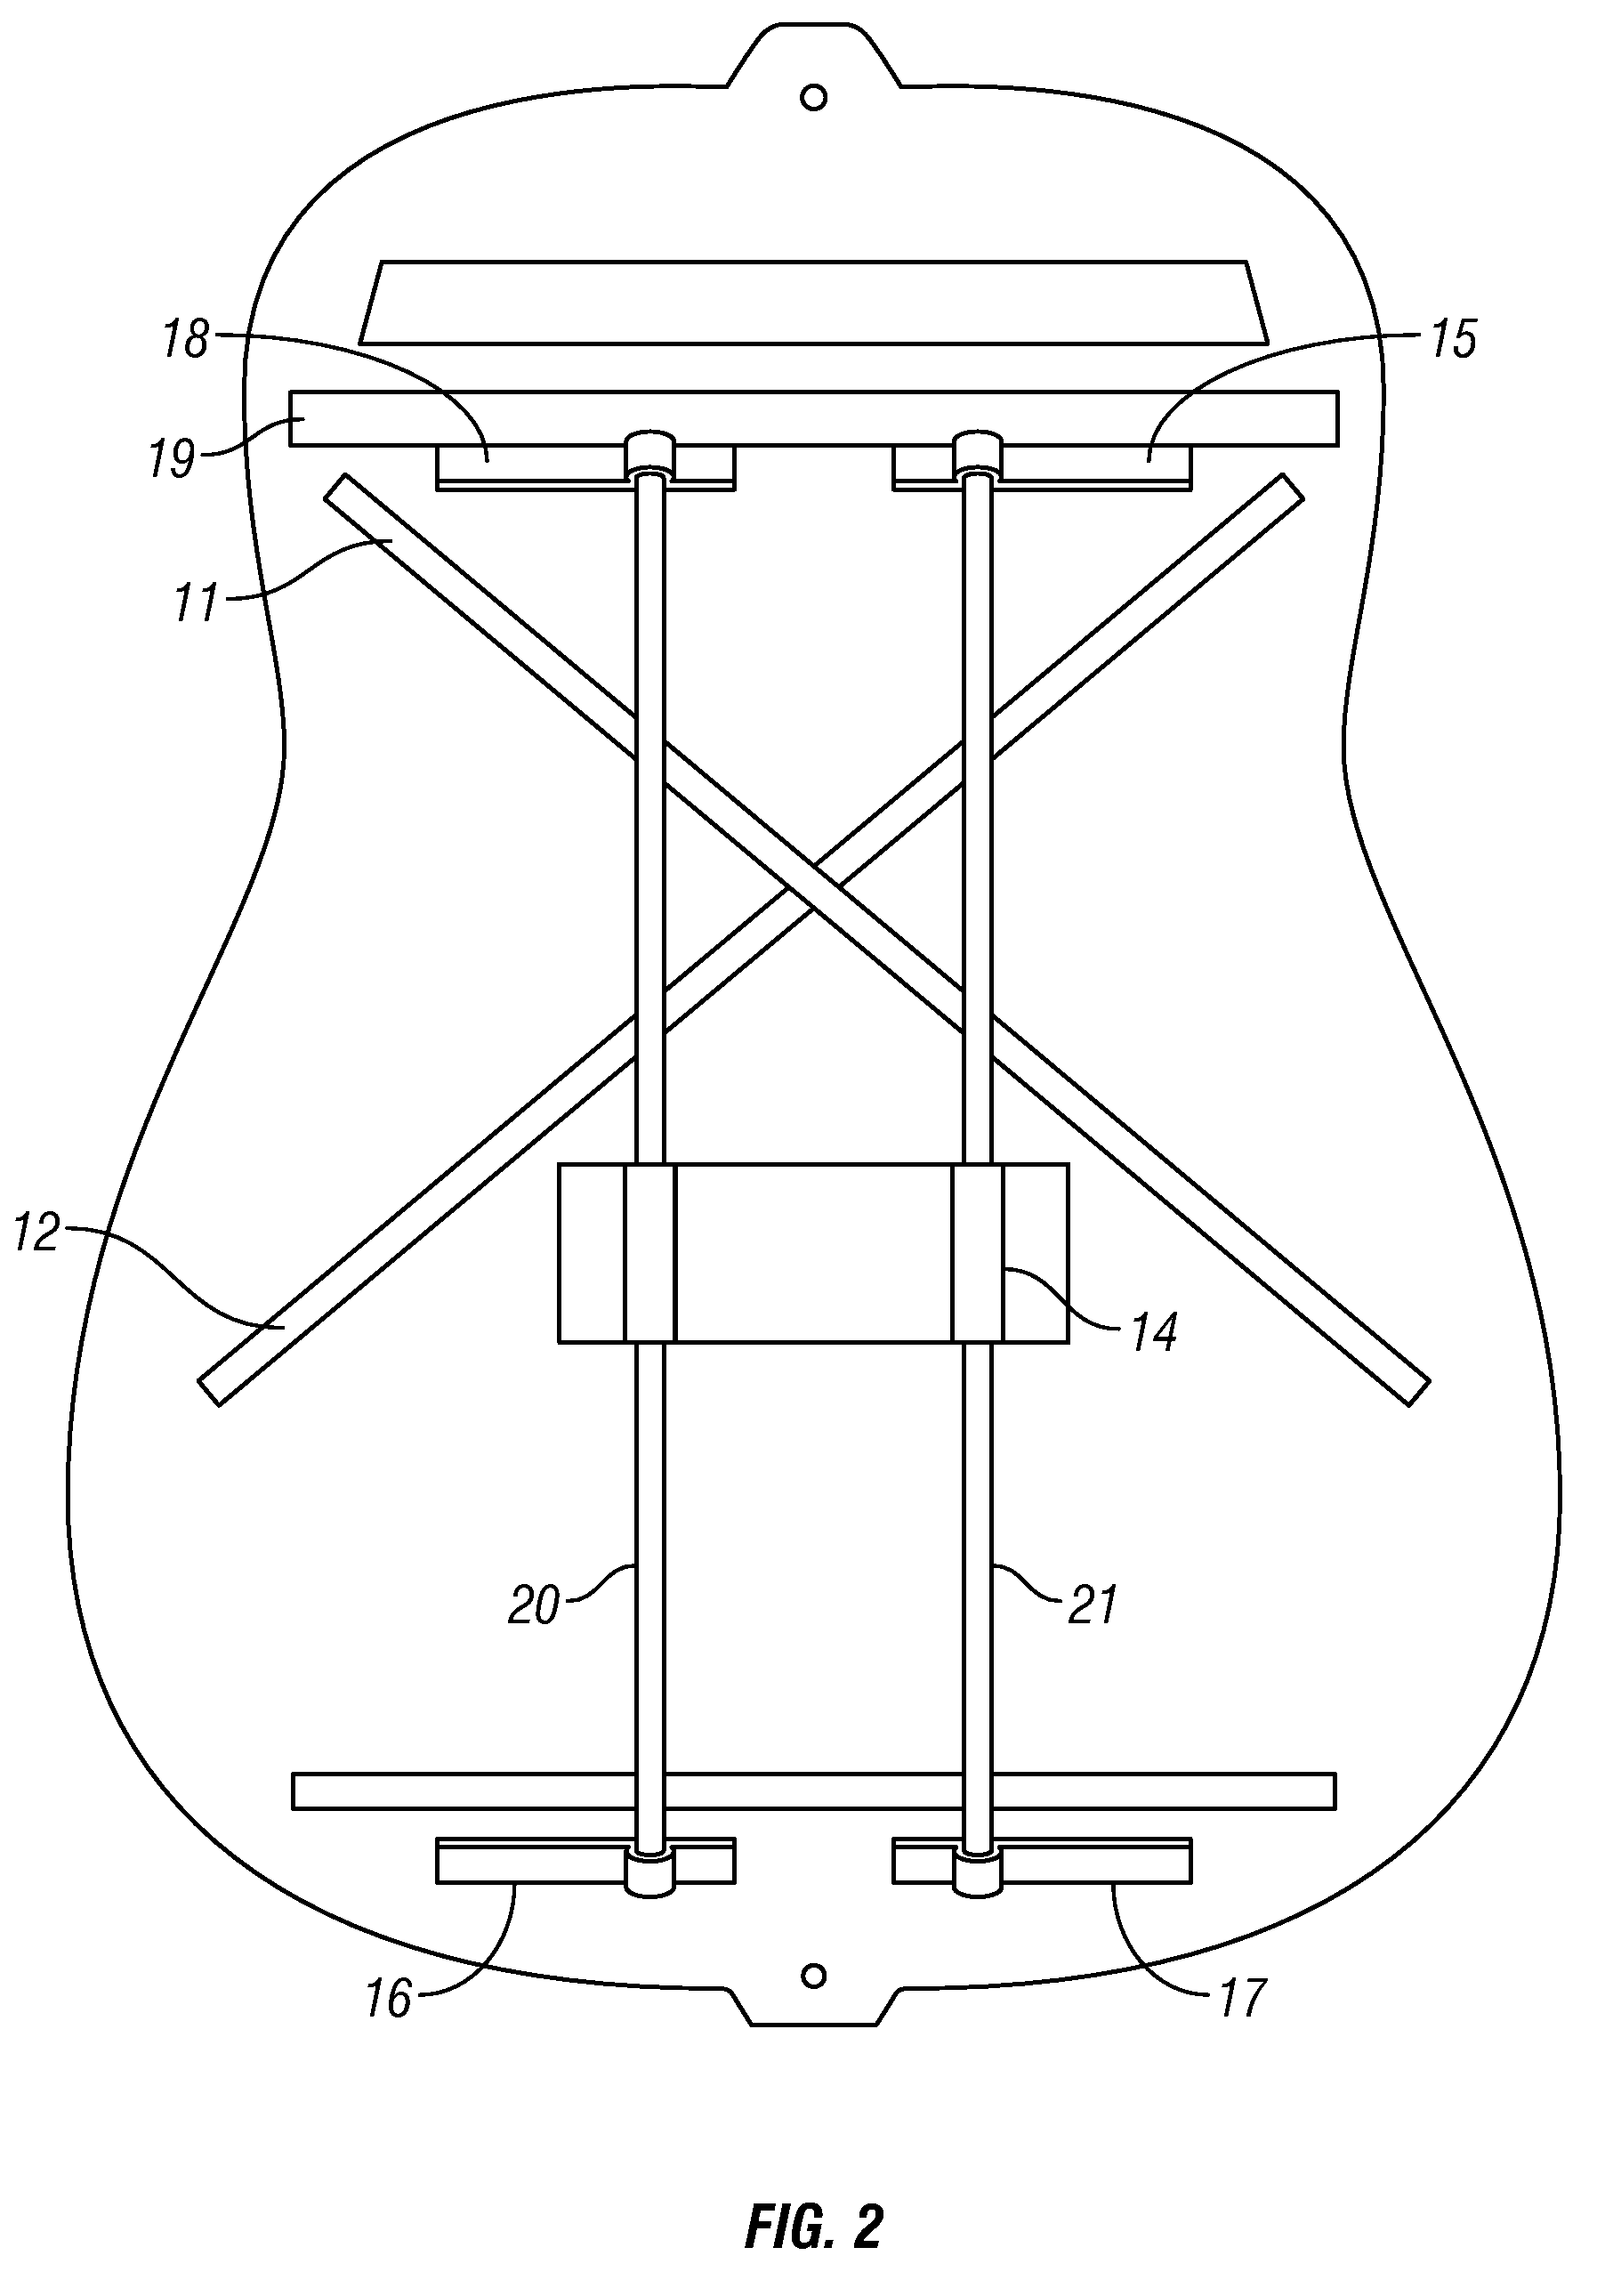 Suspended bracing system for acoustic musical instruments